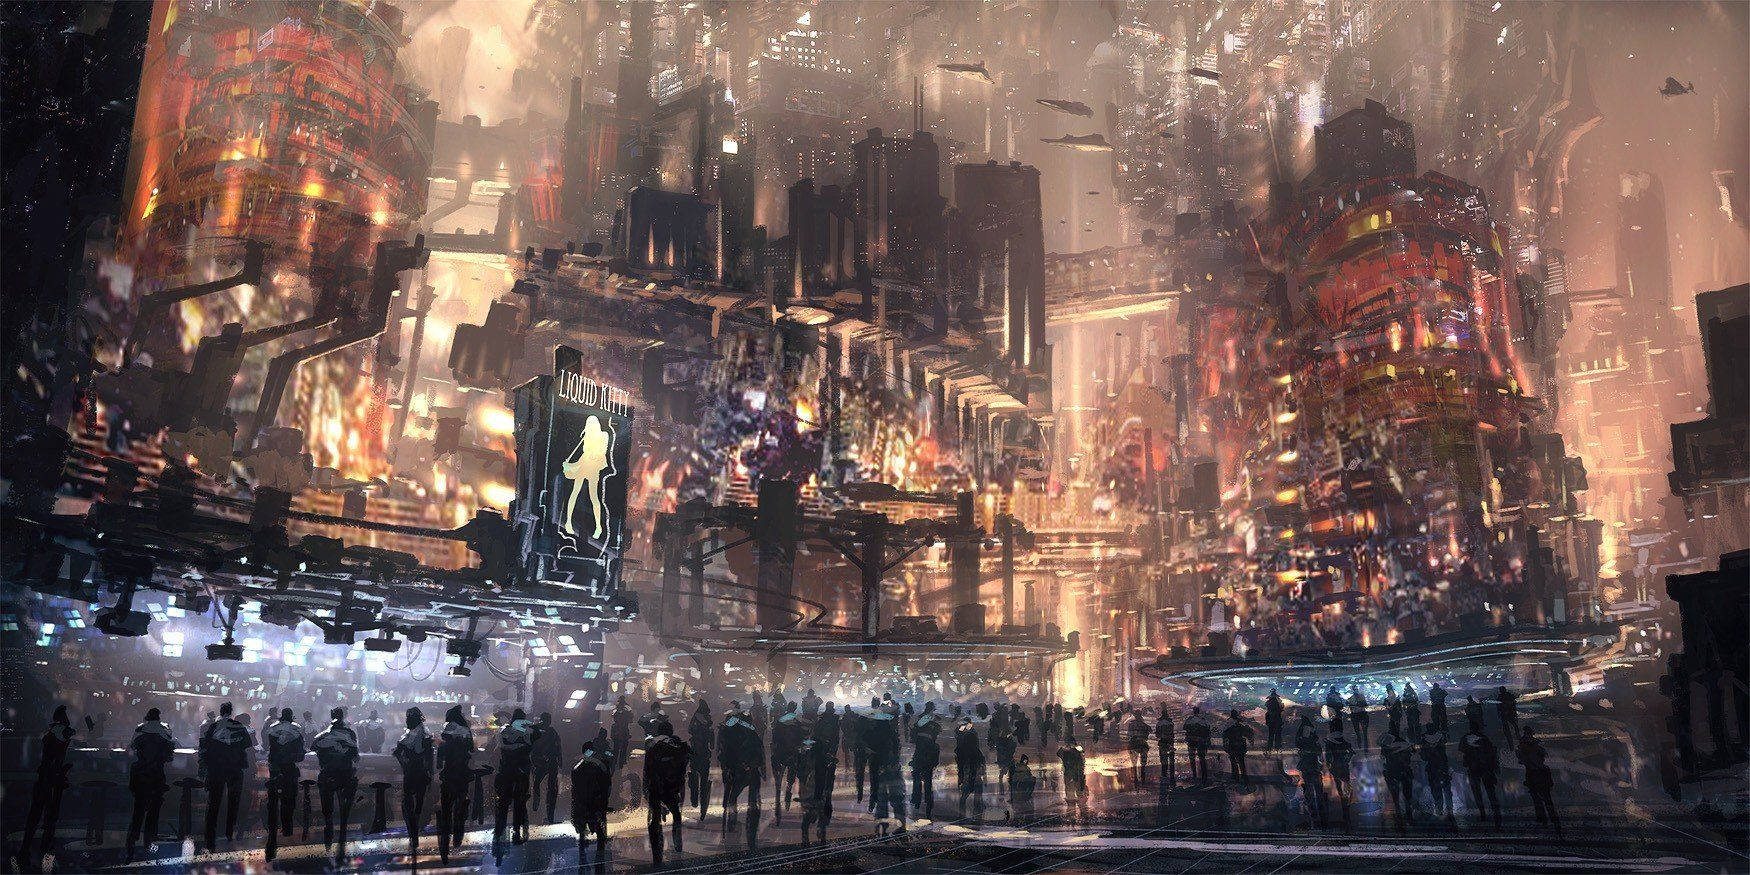 "Explore the Glowing City of the Future. Welcome to the World of Cyberpunk." Wallpaper